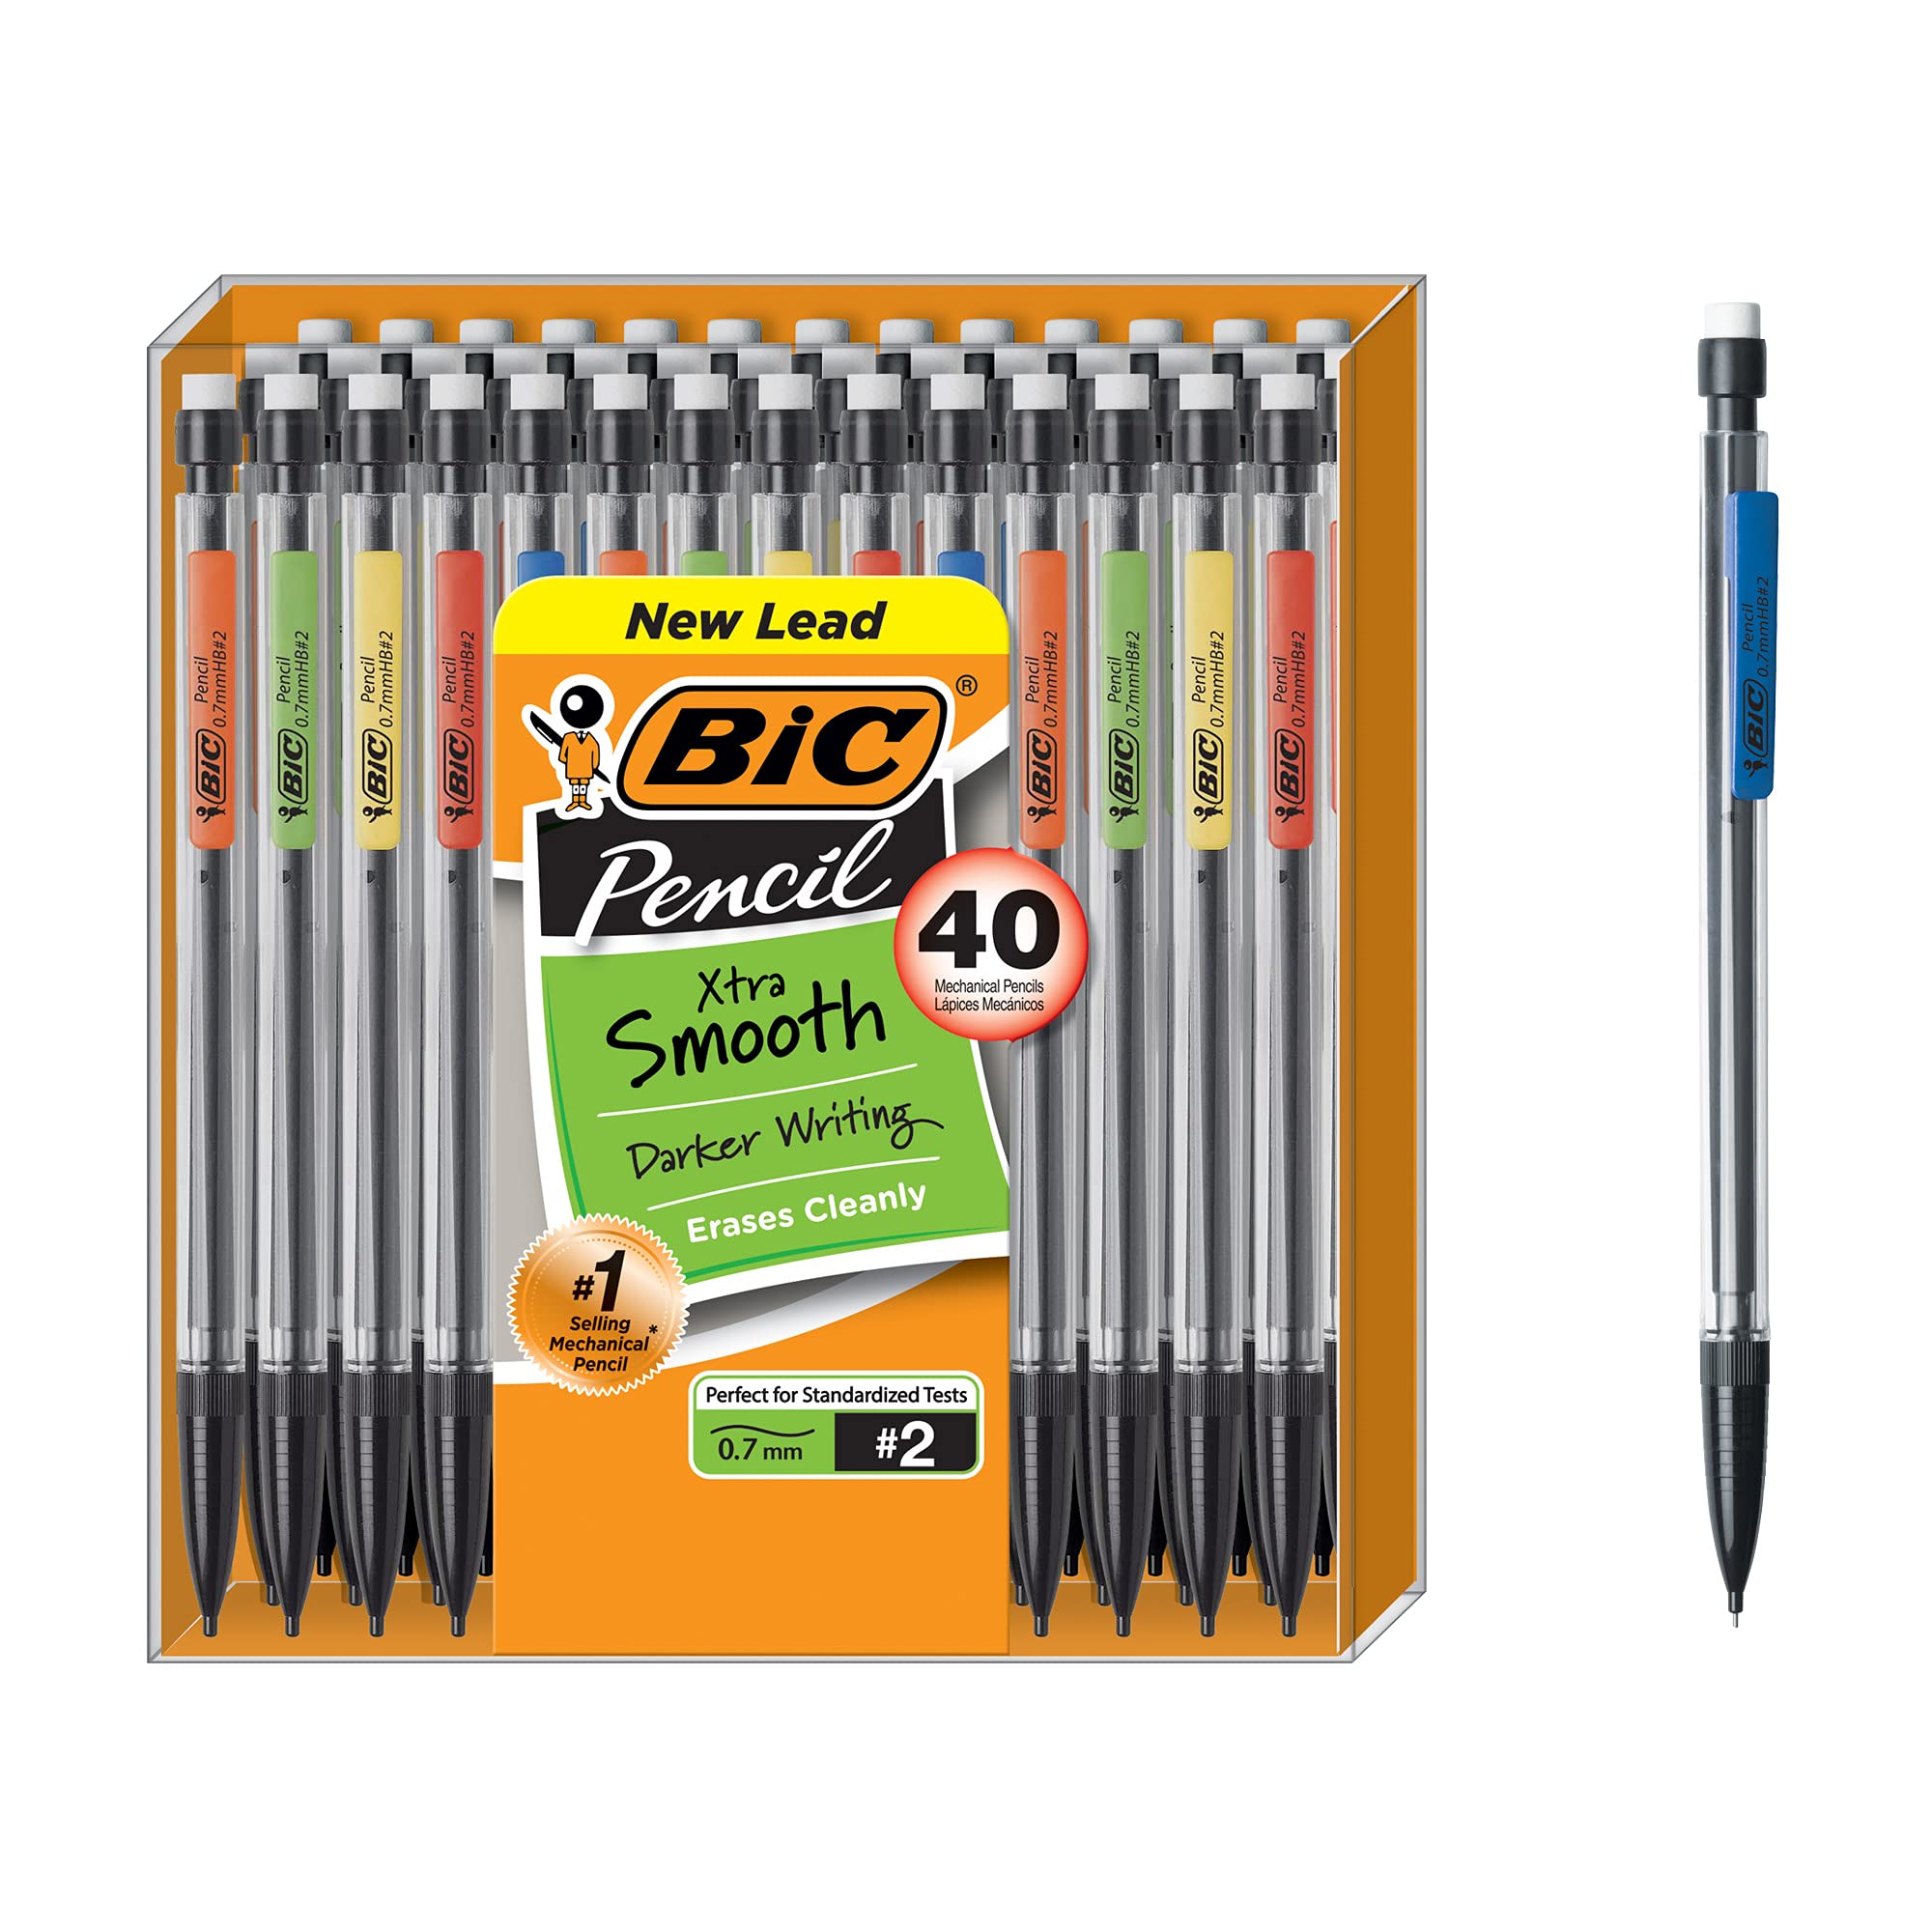 BIC Xtra-Smooth Mechanical Pencil, Medium Point (0.7 mm), 40-Count , Black for $4.78 @ Amazon